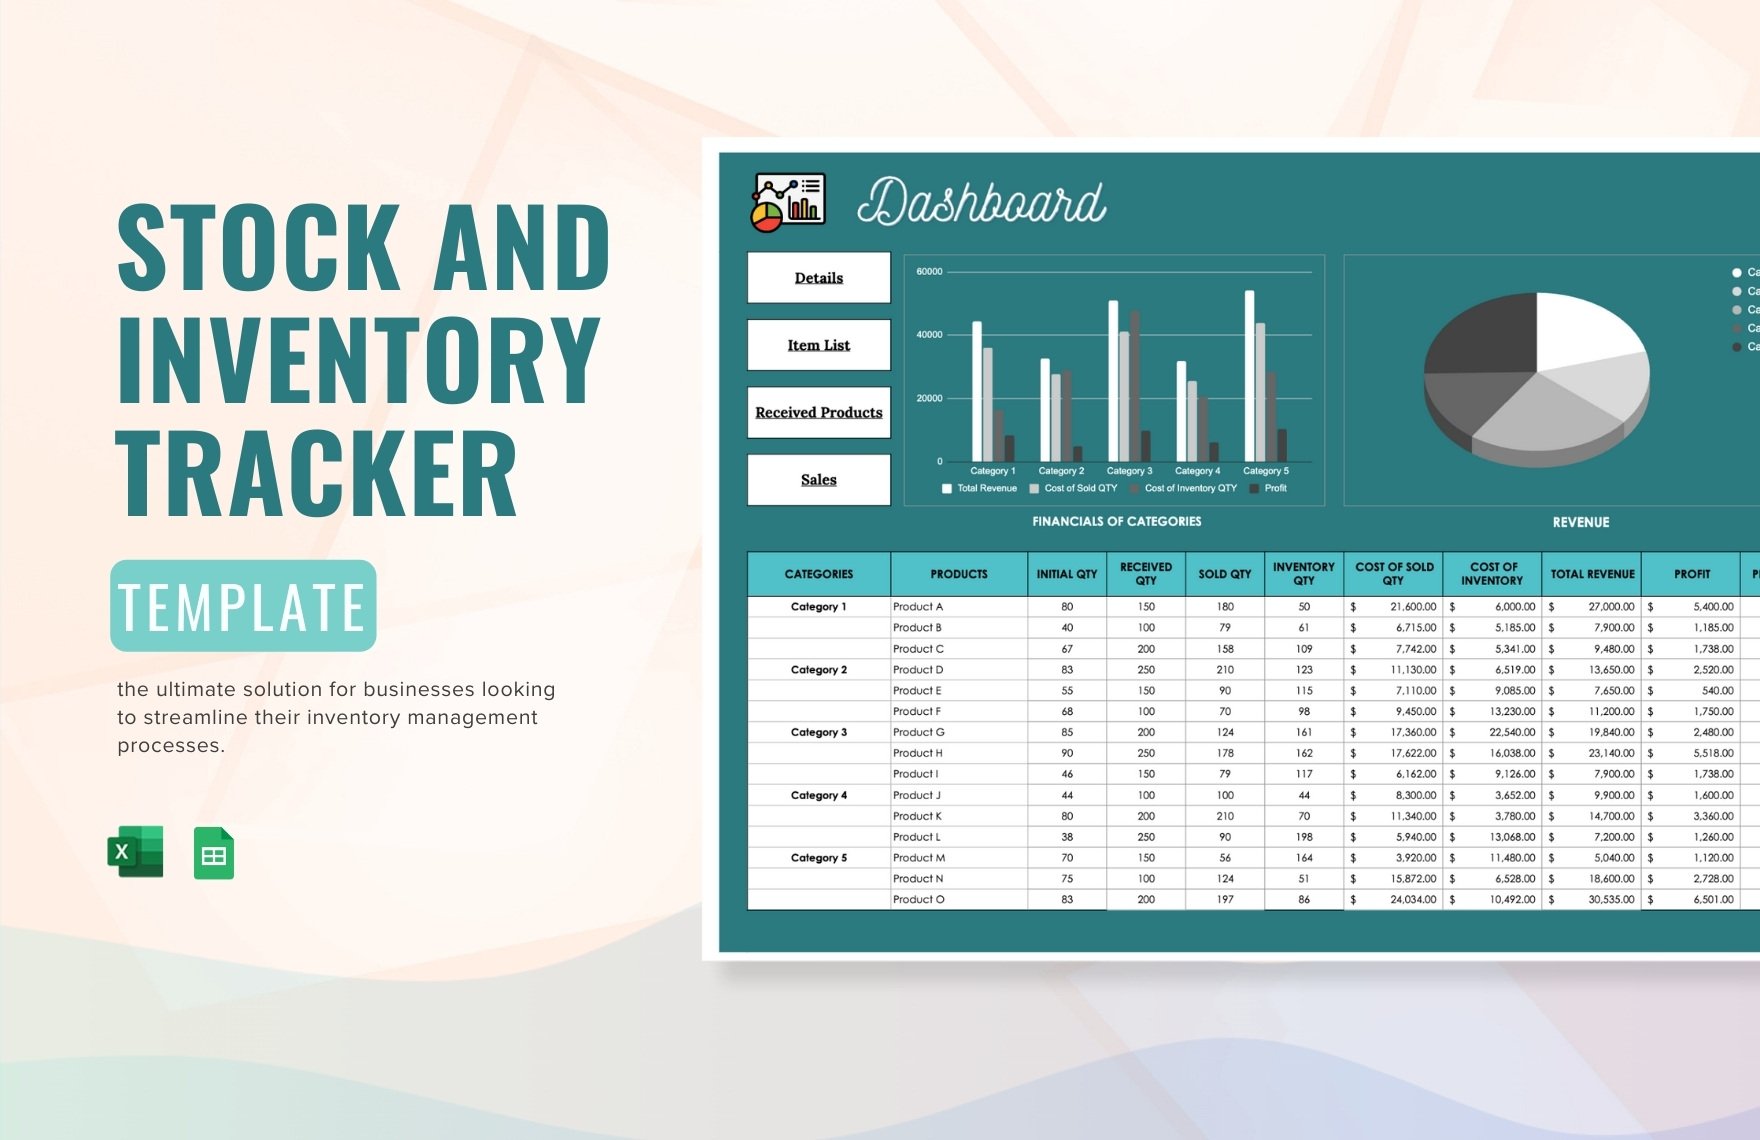 Stock and Inventory Tracker Template